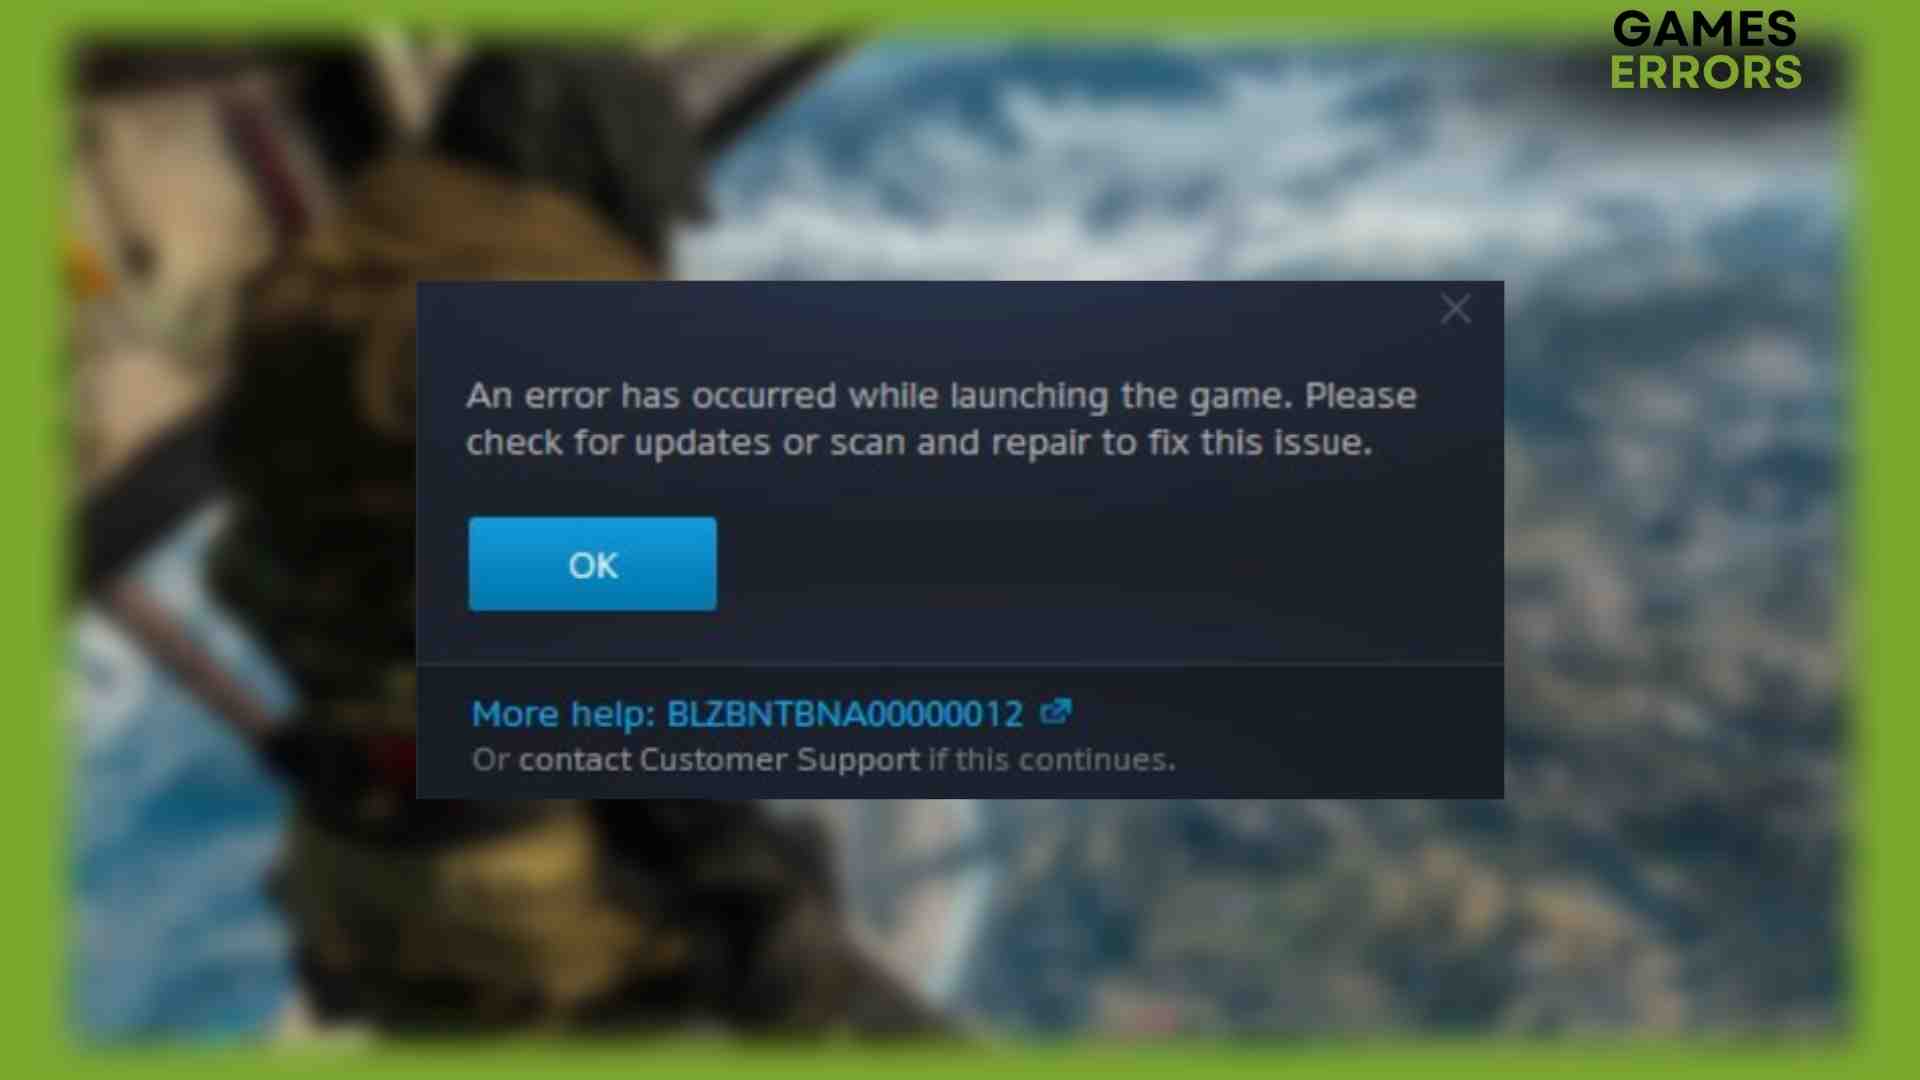 Select Options and click on Scan and Repair
Wait for the process to complete and launch the game to check if the issue is resolved